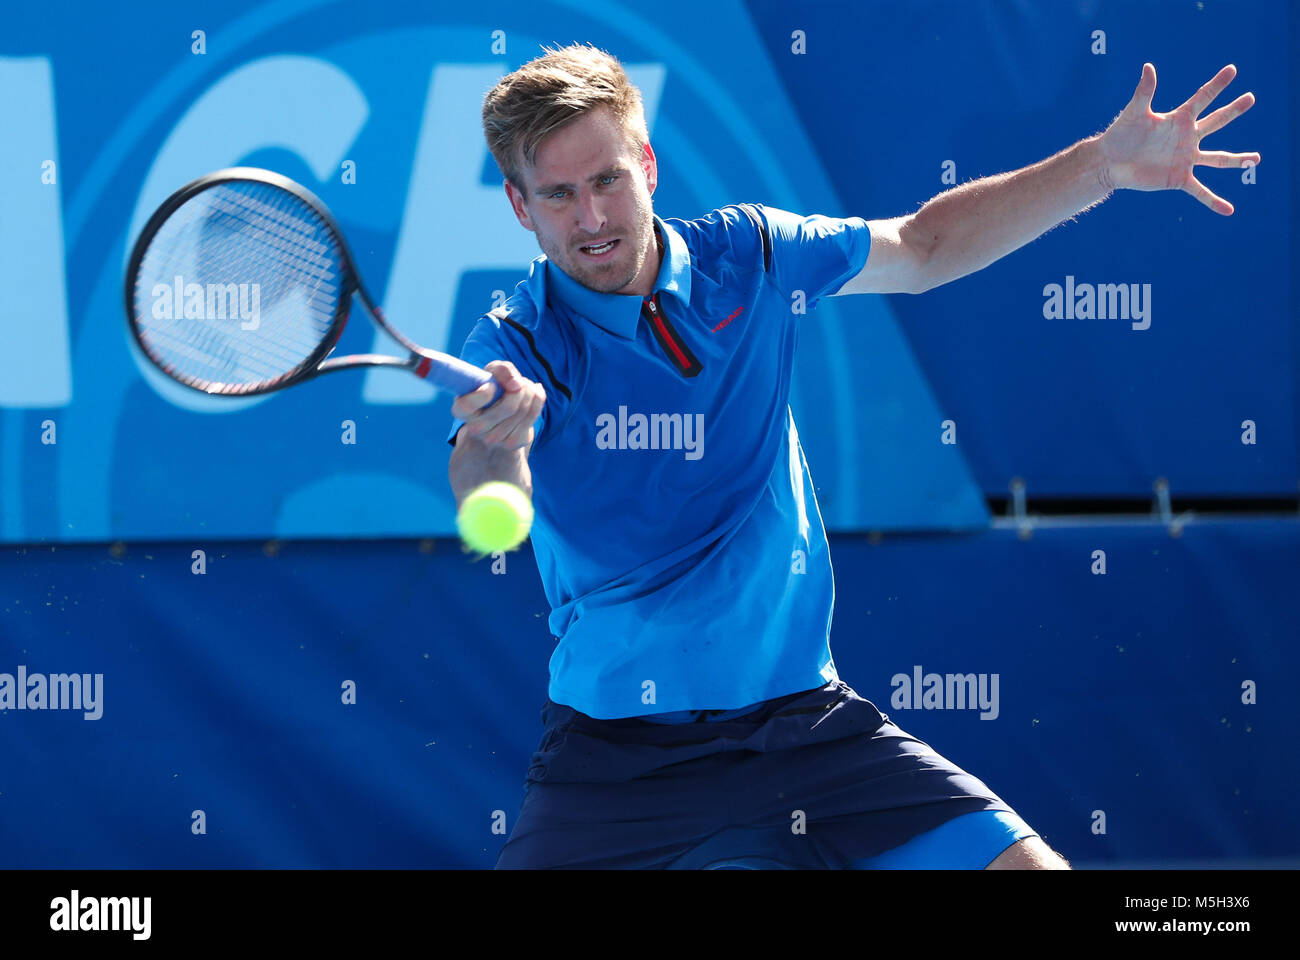 February 23, 2018: Peter Gojowczyk, of Germany, hits a forehand during a  quarterfinal match against Reilly Opelka, of the United States, during the  2018 Delray Beach Open ATP professional tennis tournament, played